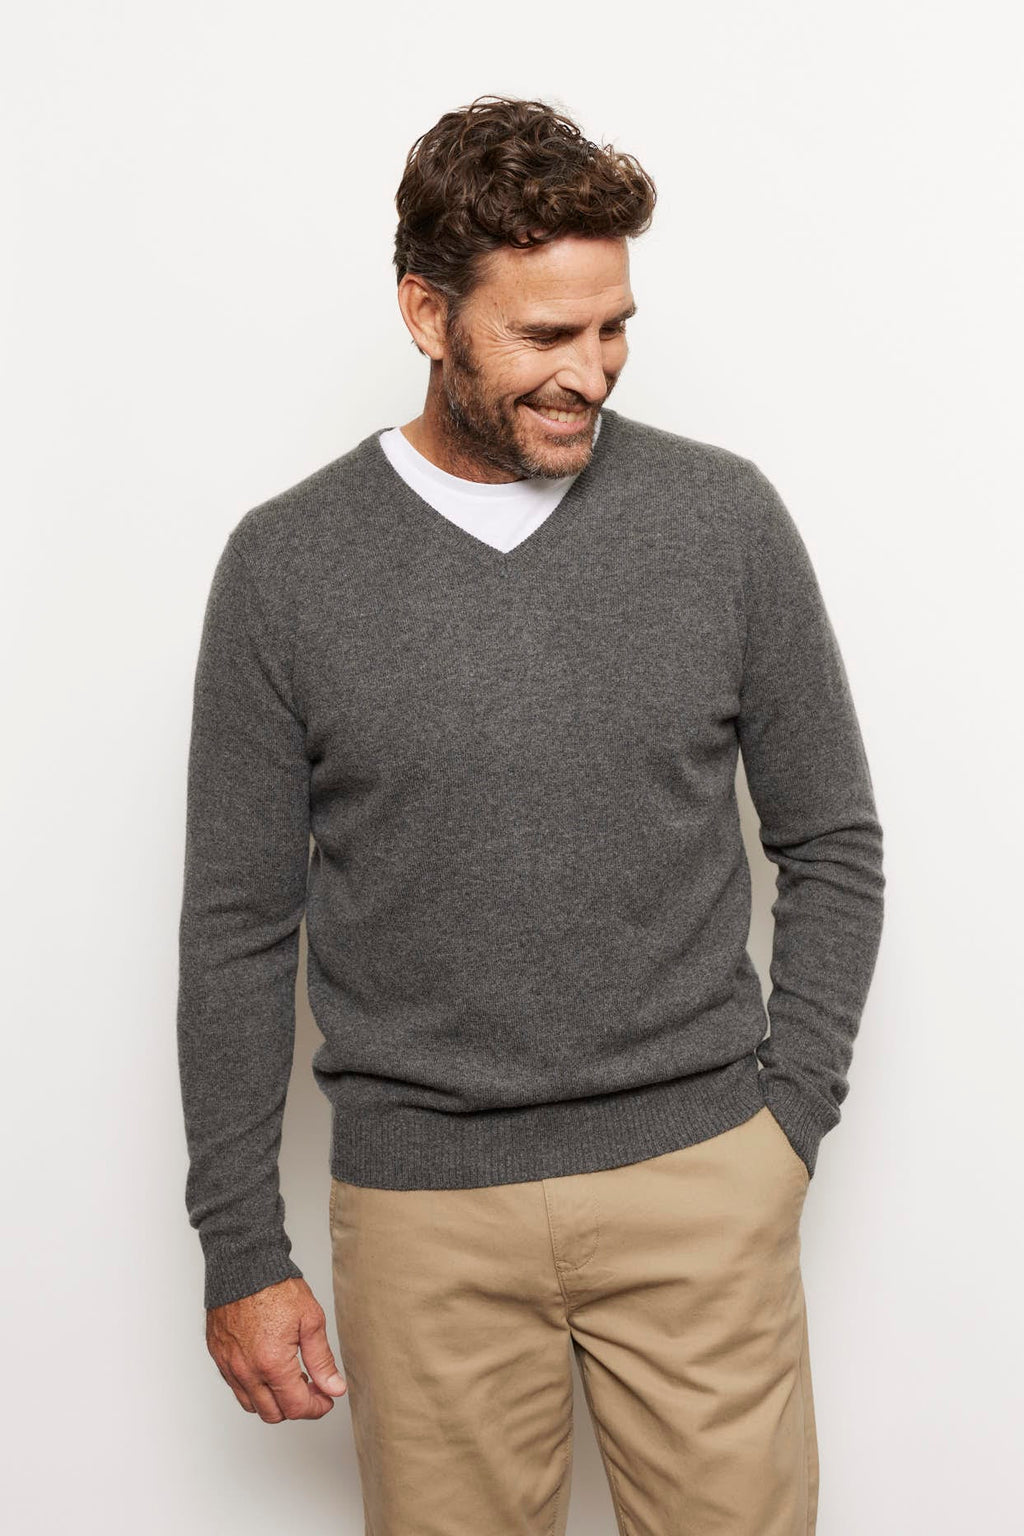 Alessandra Men's Alex Cashmere Sweater in Charcoal Grey